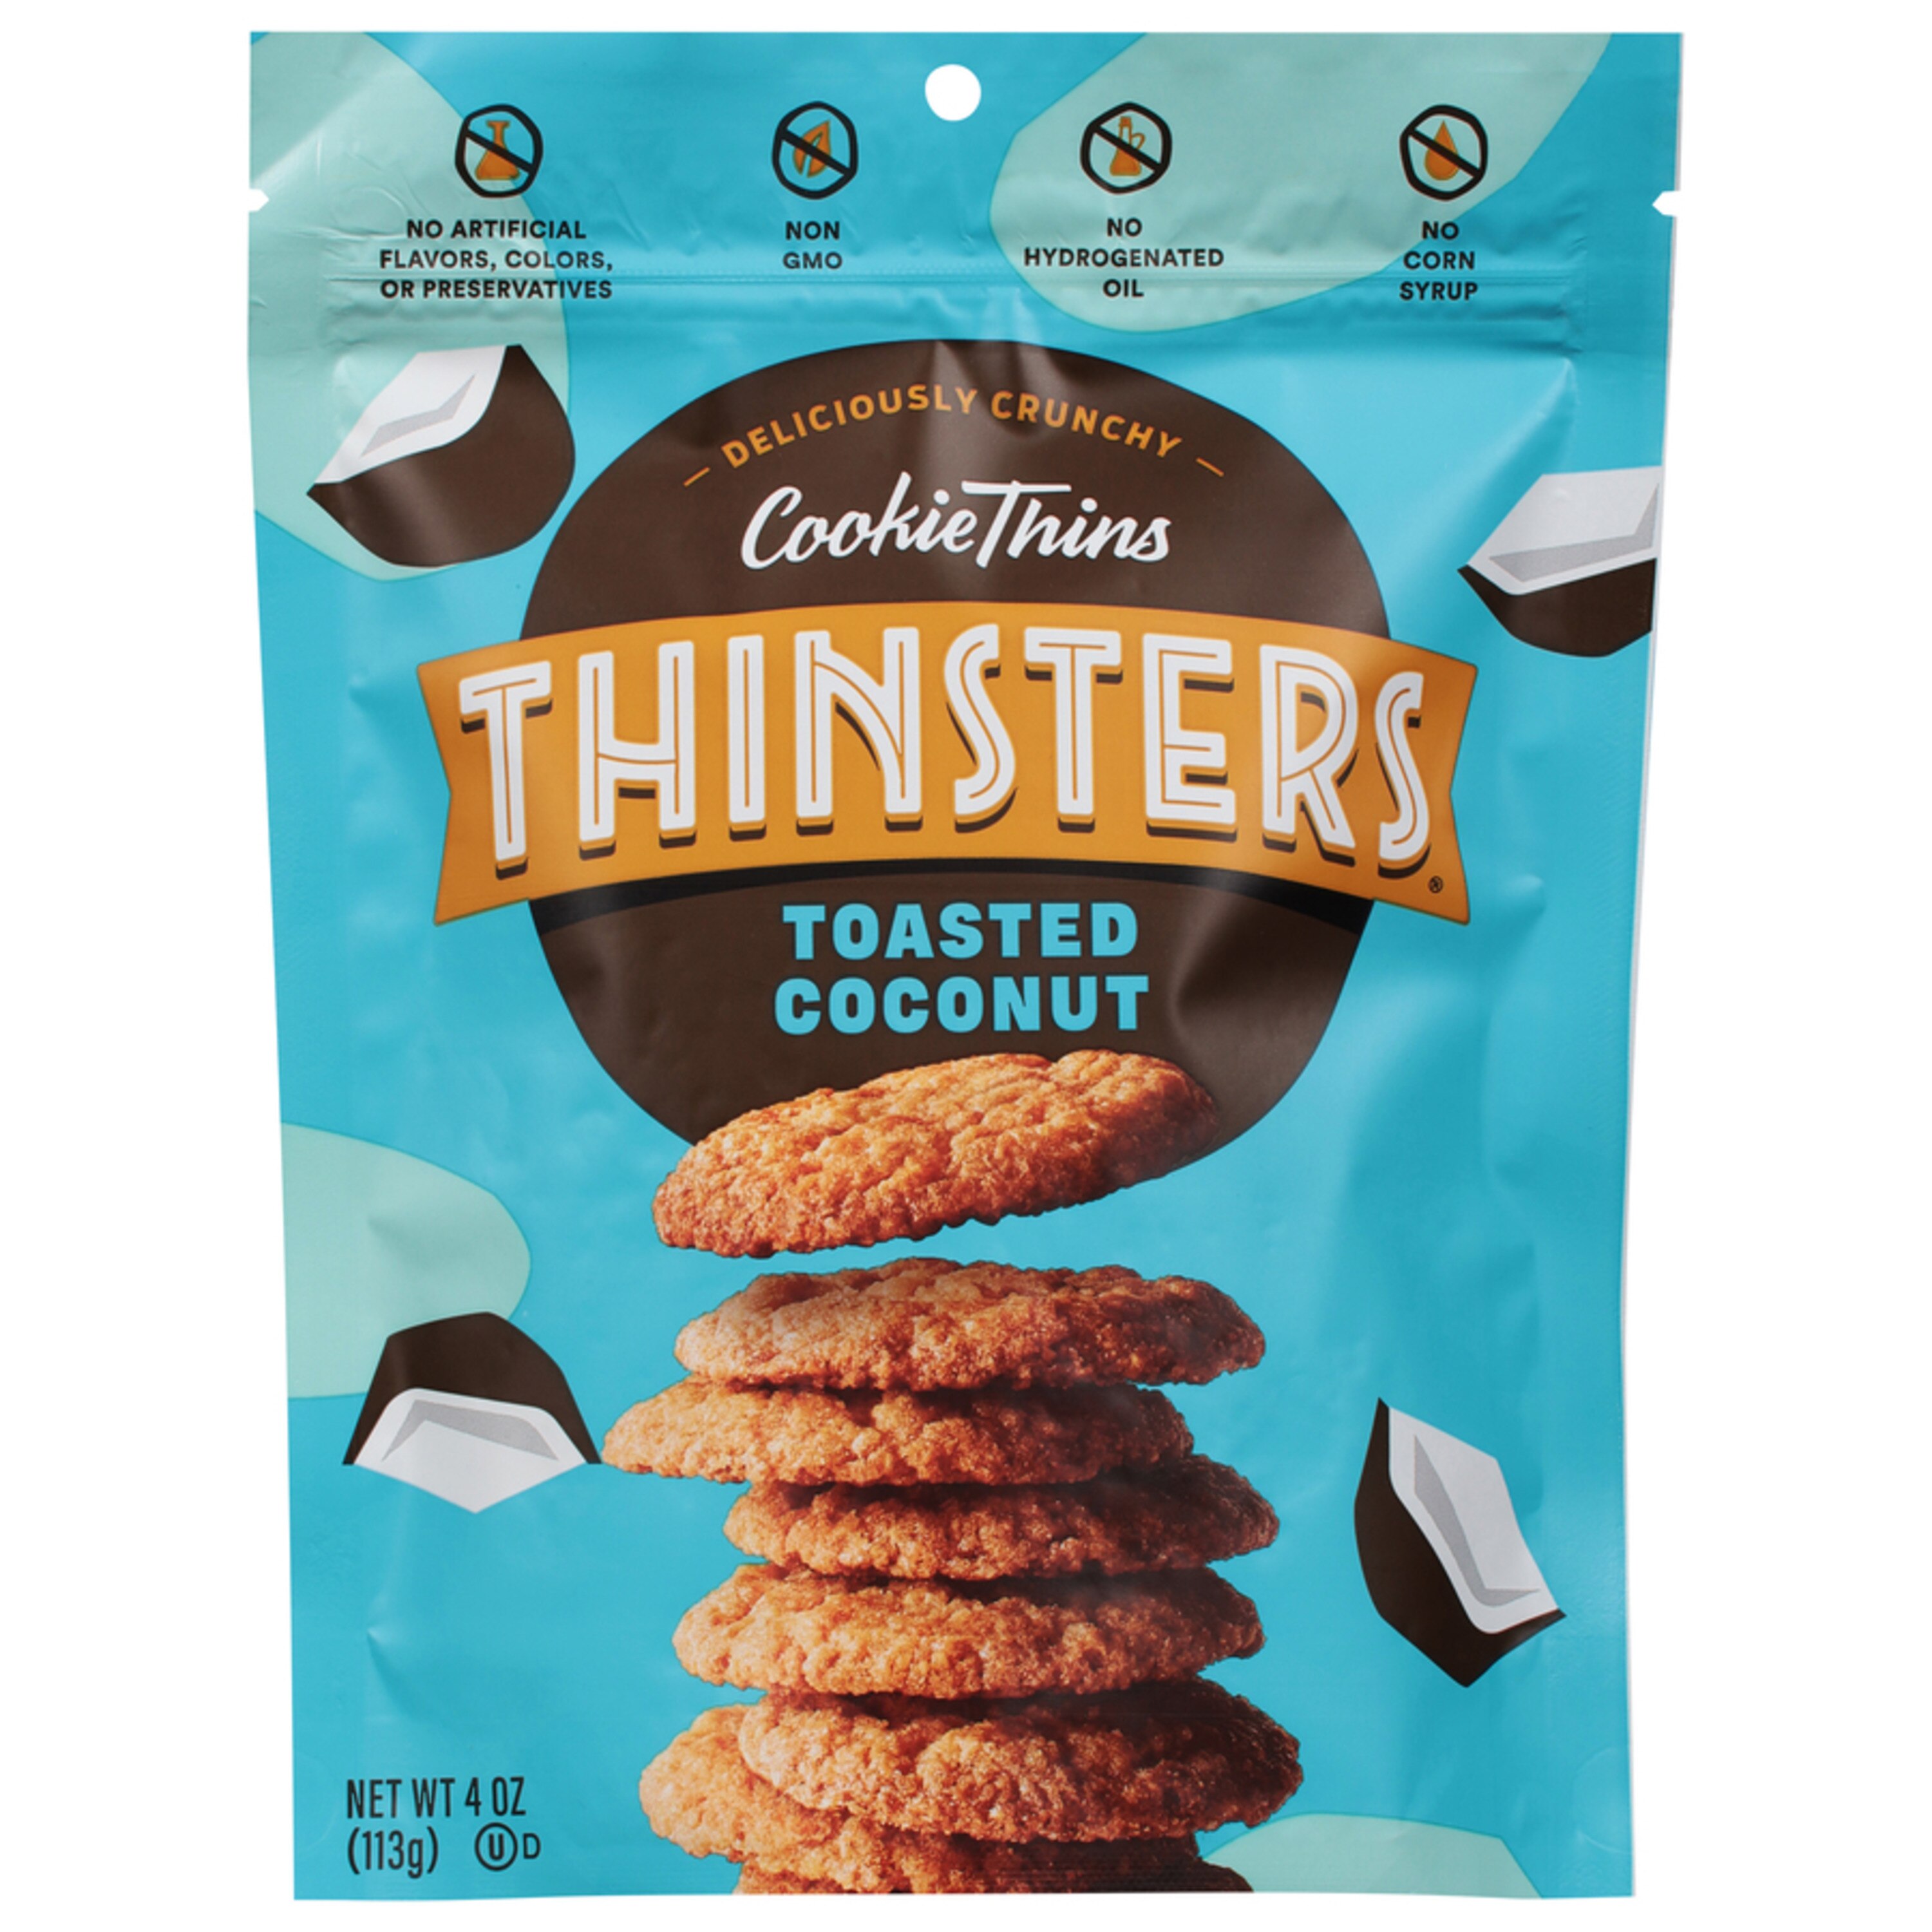 Thinsters, Toasted Coconut, Cookie Thins, 4 oz